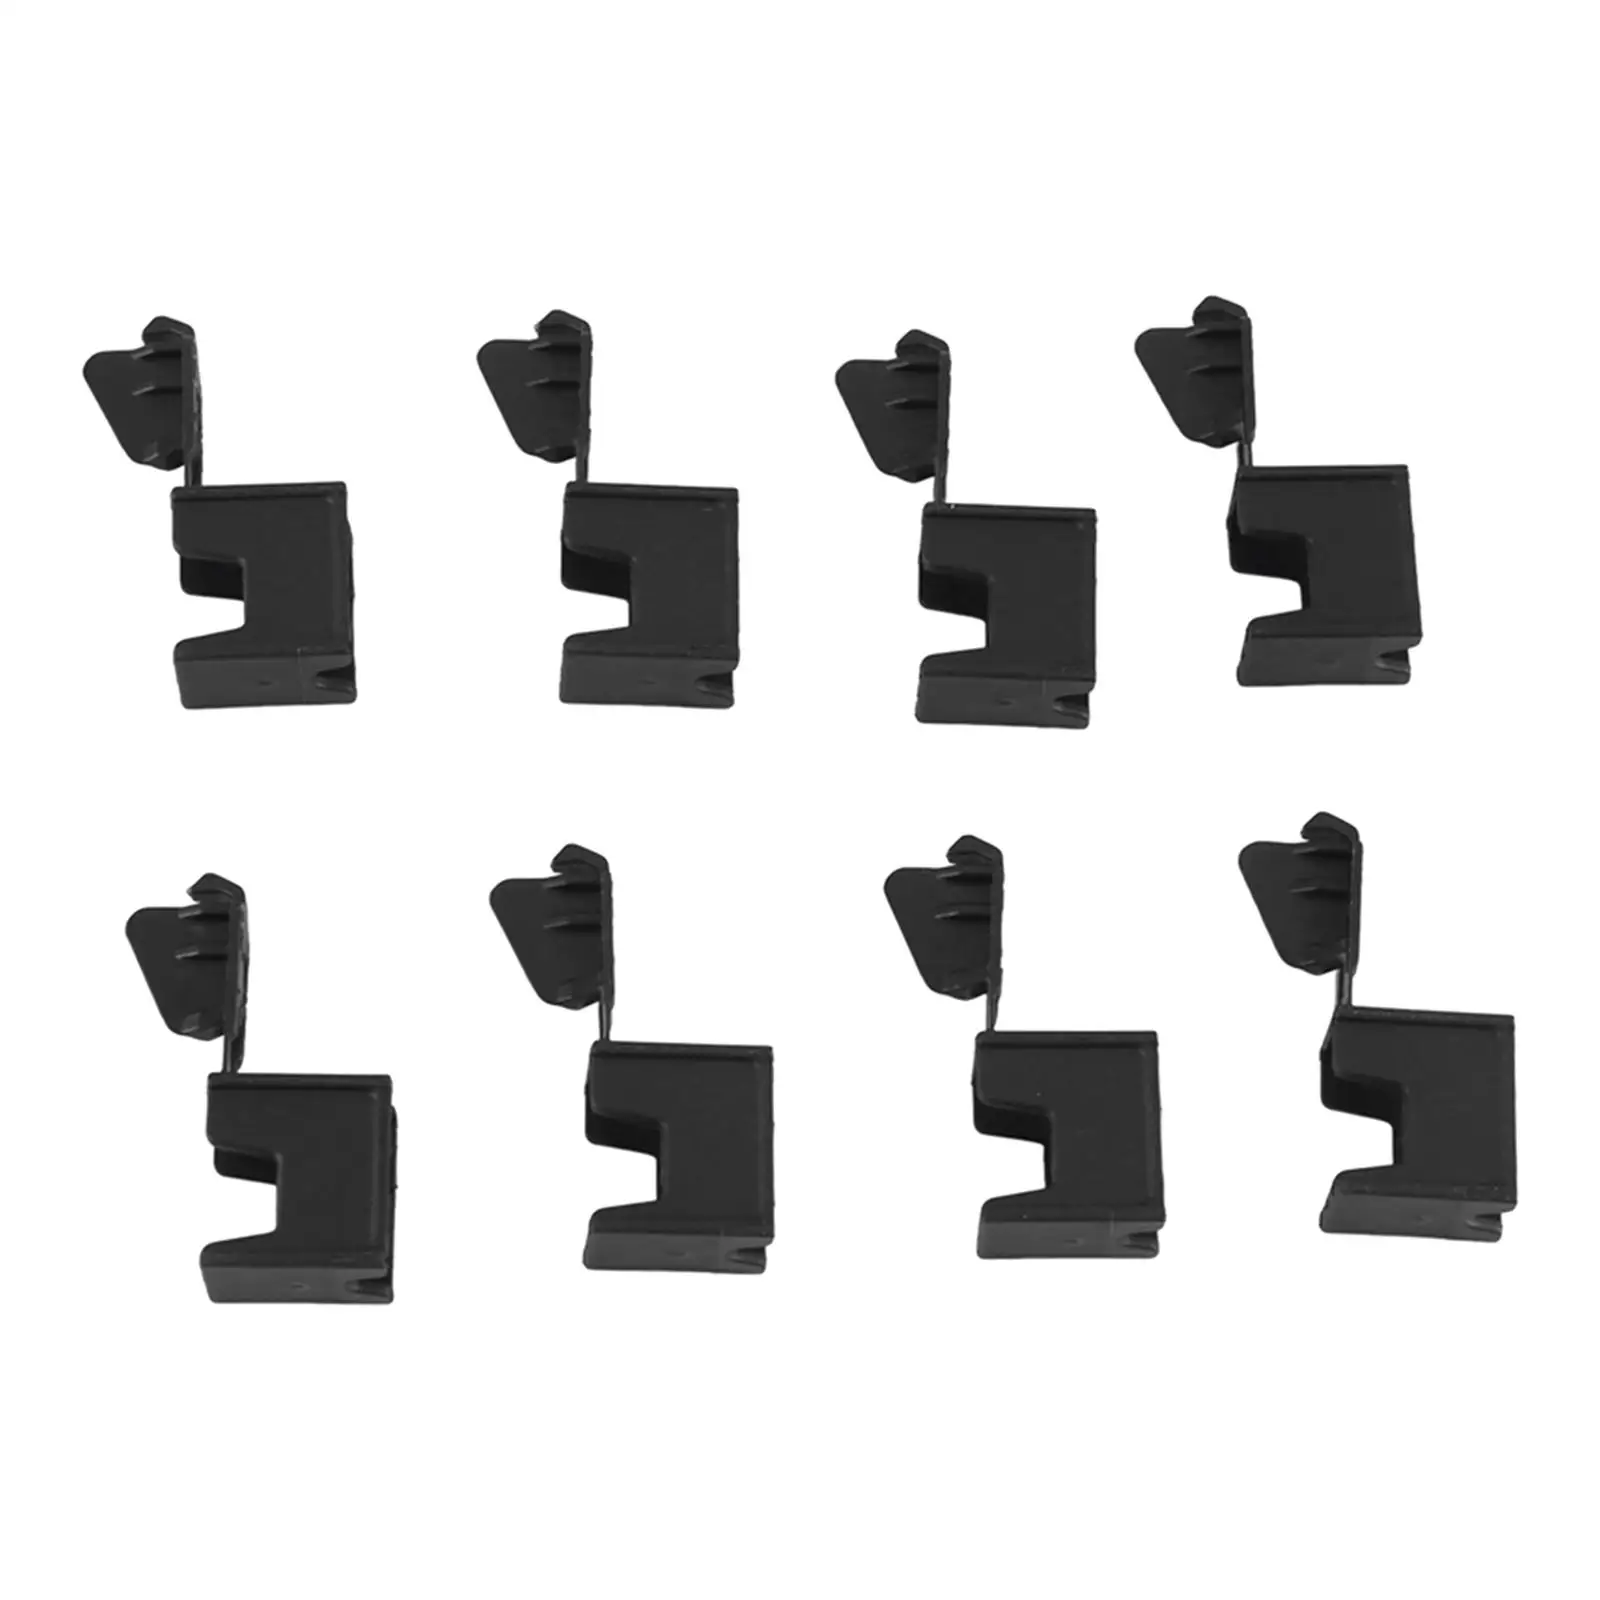 8x Convertible Roof Top Hinge Cover Clips 54377187747 Wear Resistant Auto Parts Roof Rail Mounting Kit for BMW E93 M4 F83